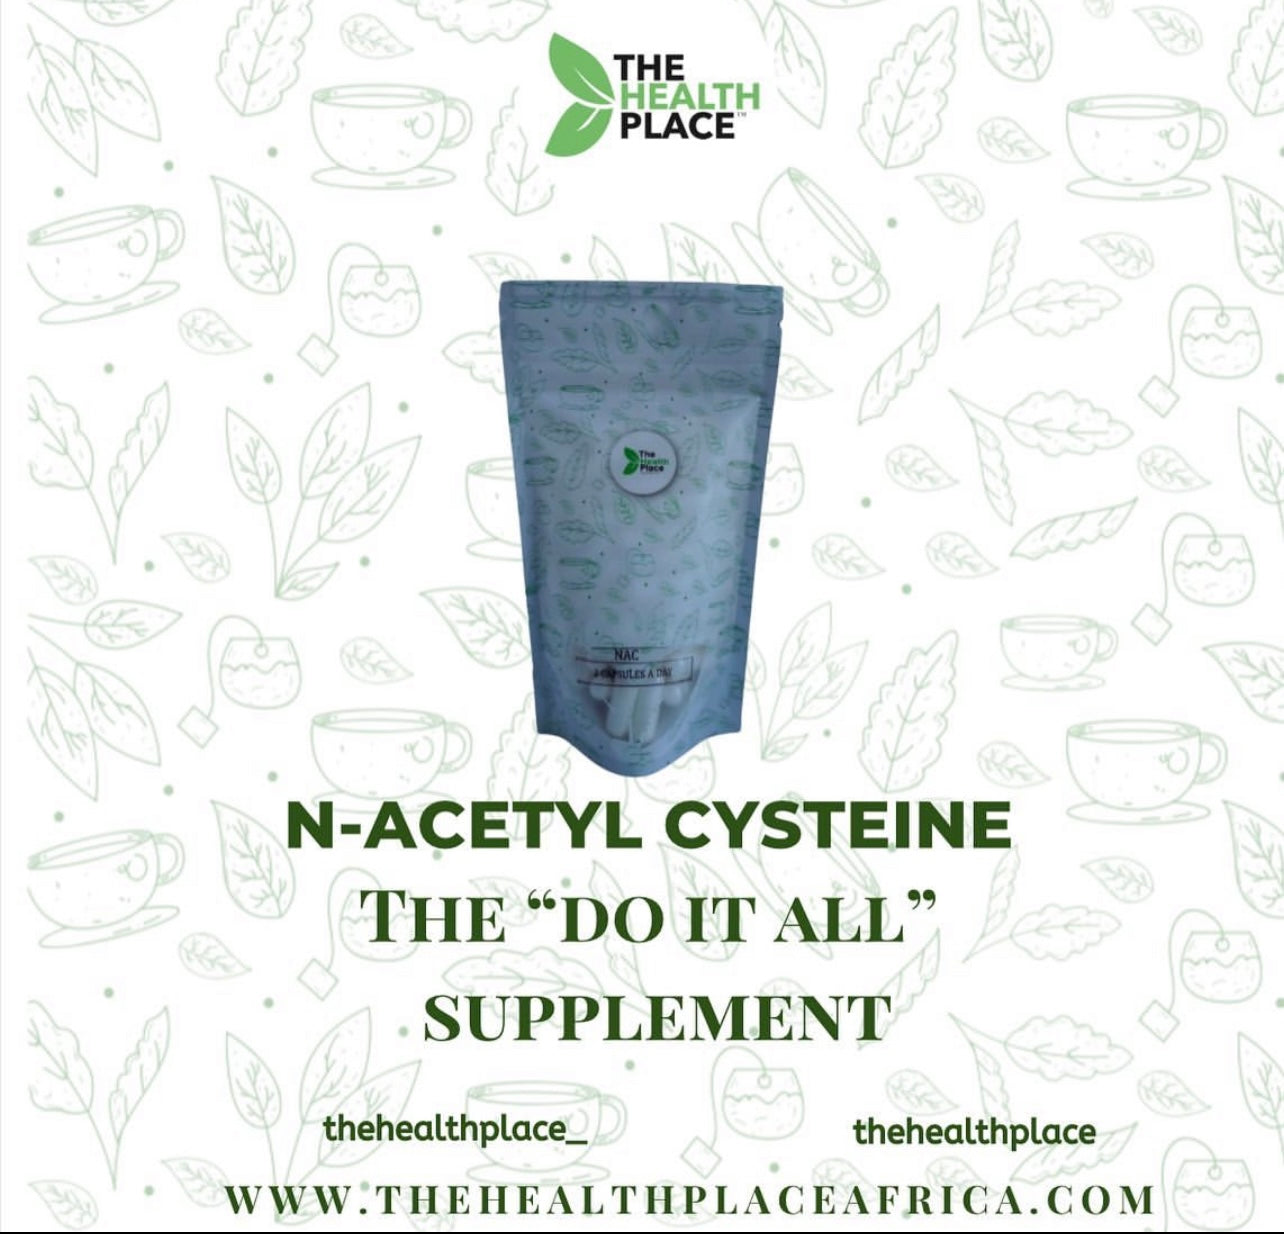 N-ACETYL CYSTEINE- THE "DO IT ALL" SUPPLEMENT